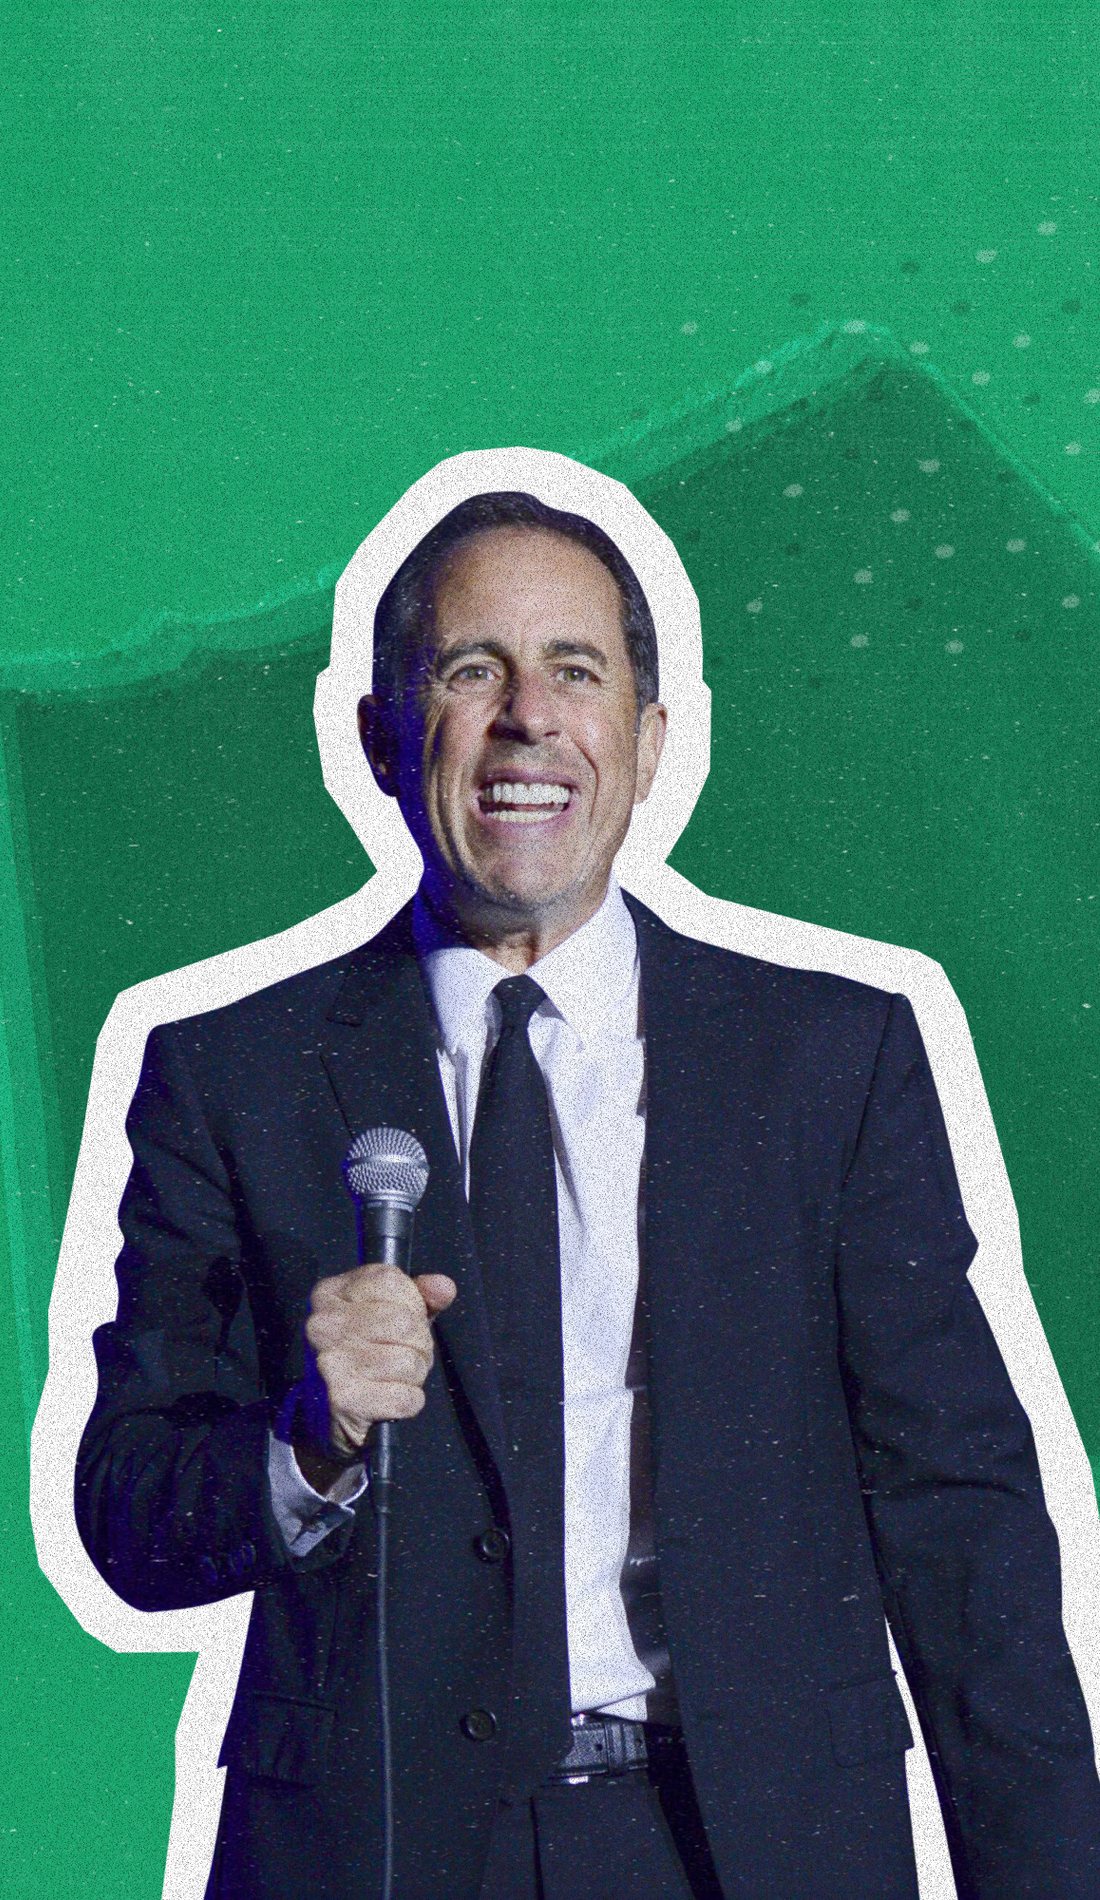 A Jerry Seinfeld live event